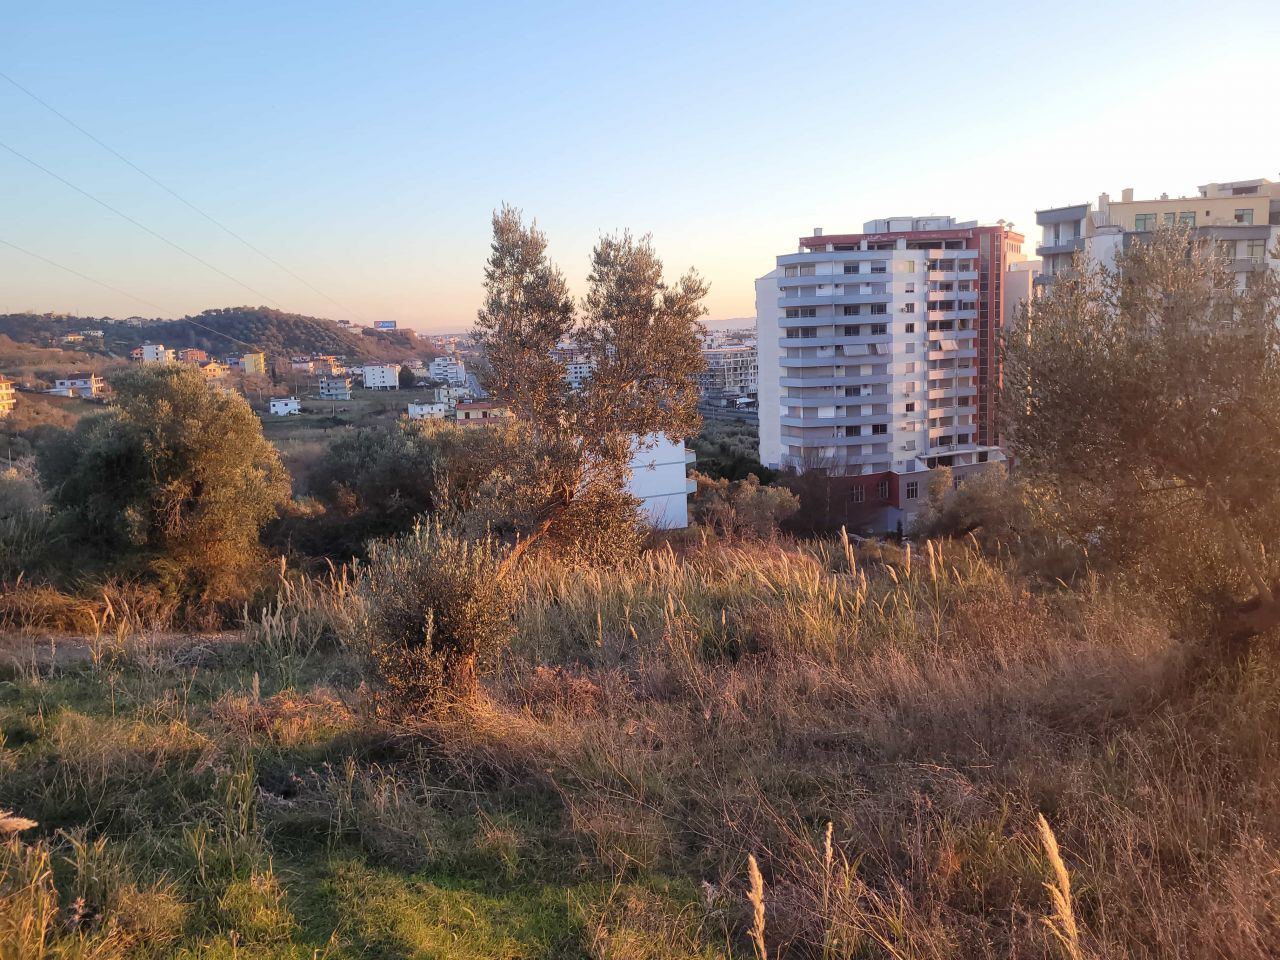 Land For Sale In Durres Albania, In A Quiet Area, Near The Beach